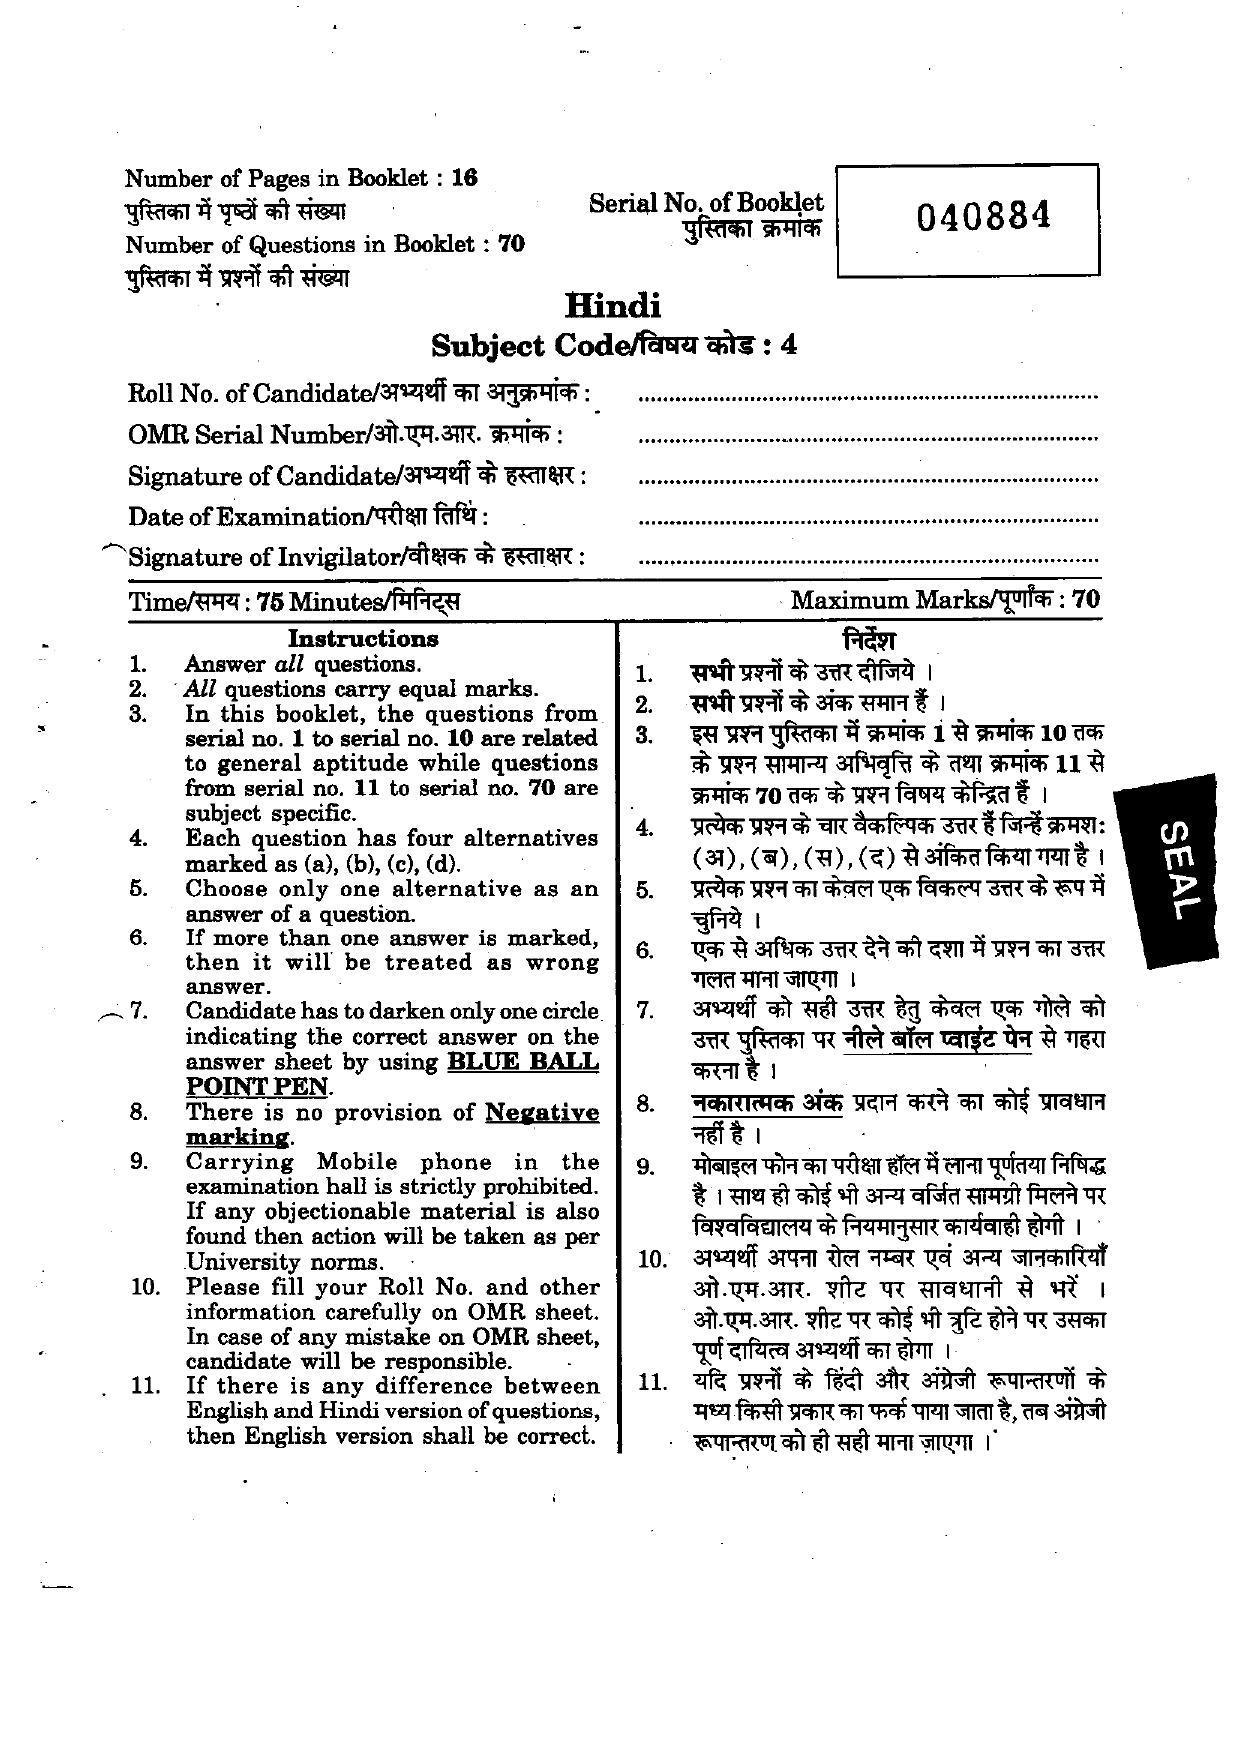 URATPG Hindi 2012 Question Paper - Page 1